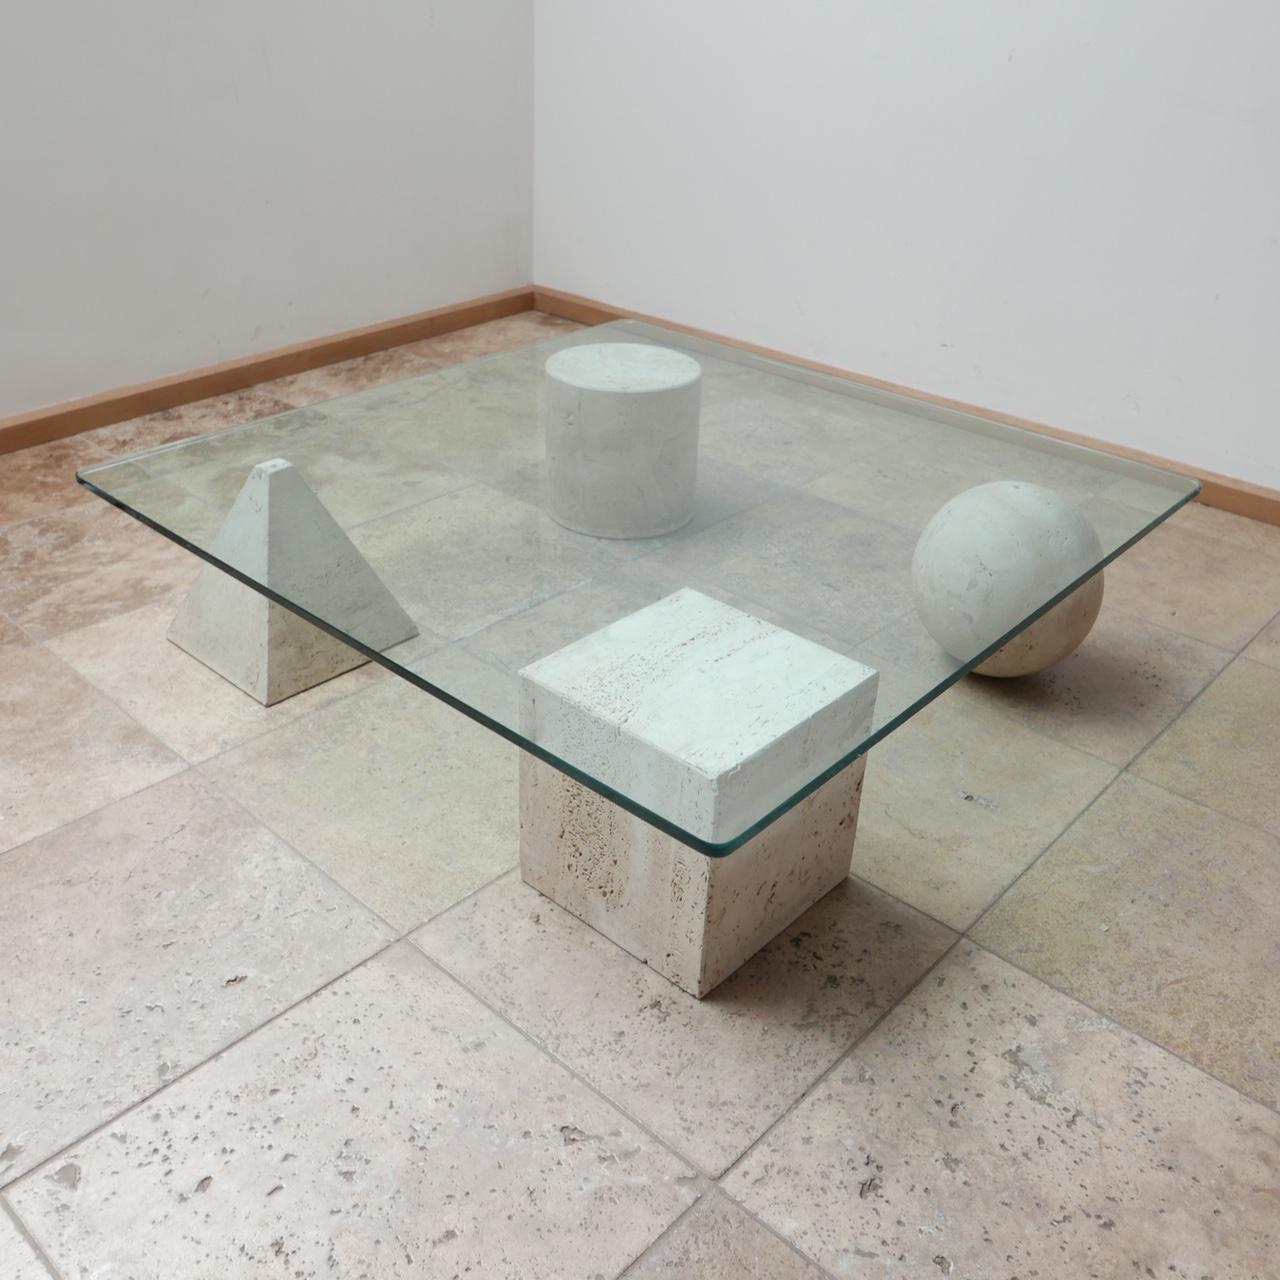 An Italian mid-century coffee table. 

Formed from solid travertine geometric shapes under a thick glass top. 

In the manner of the Metafora coffee table by Massimo and Lella Vignelli.

Likely produced by Cinna. 

Italy, c1980s. 

Glass is approx